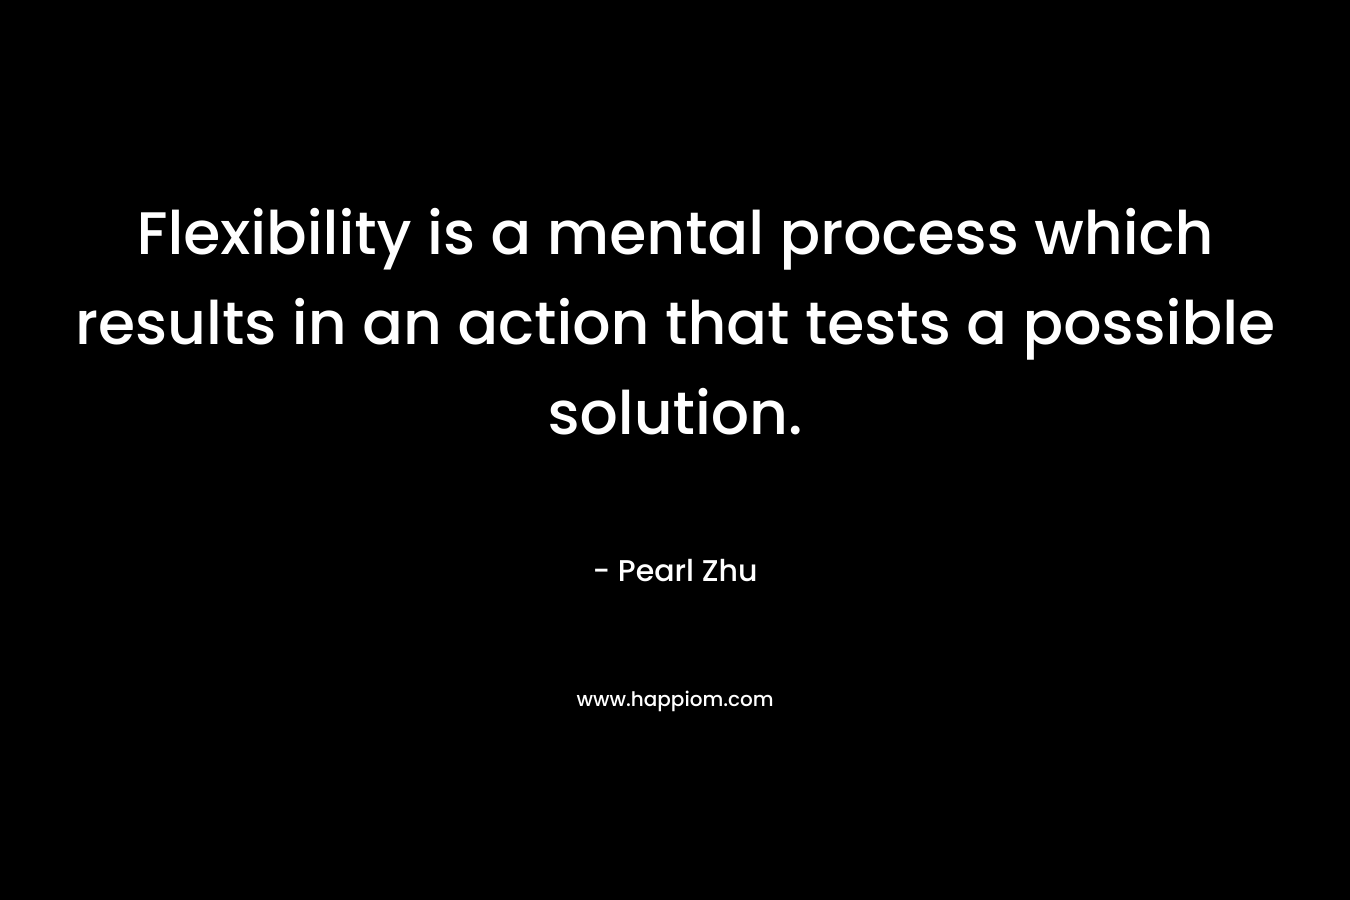 Flexibility is a mental process which results in an action that tests a possible solution. – Pearl Zhu